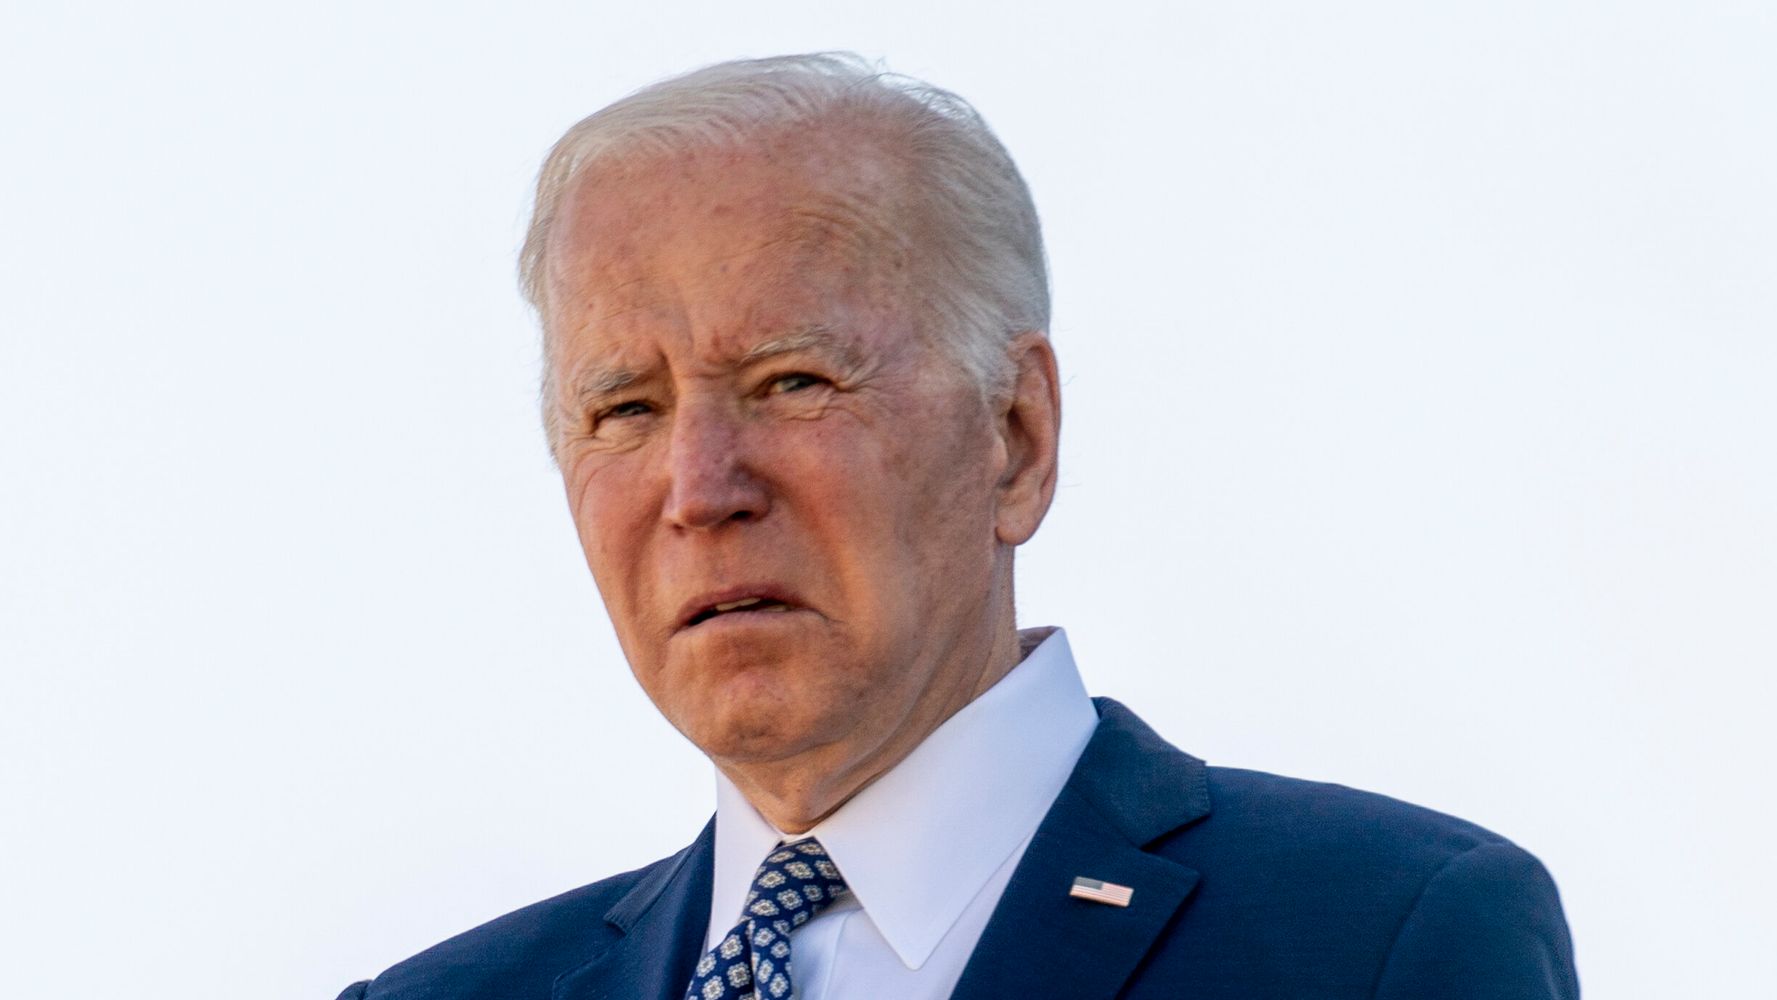 Biden On Texas School Shooting: 'Why Are We Willing To Live With This Carnage?'